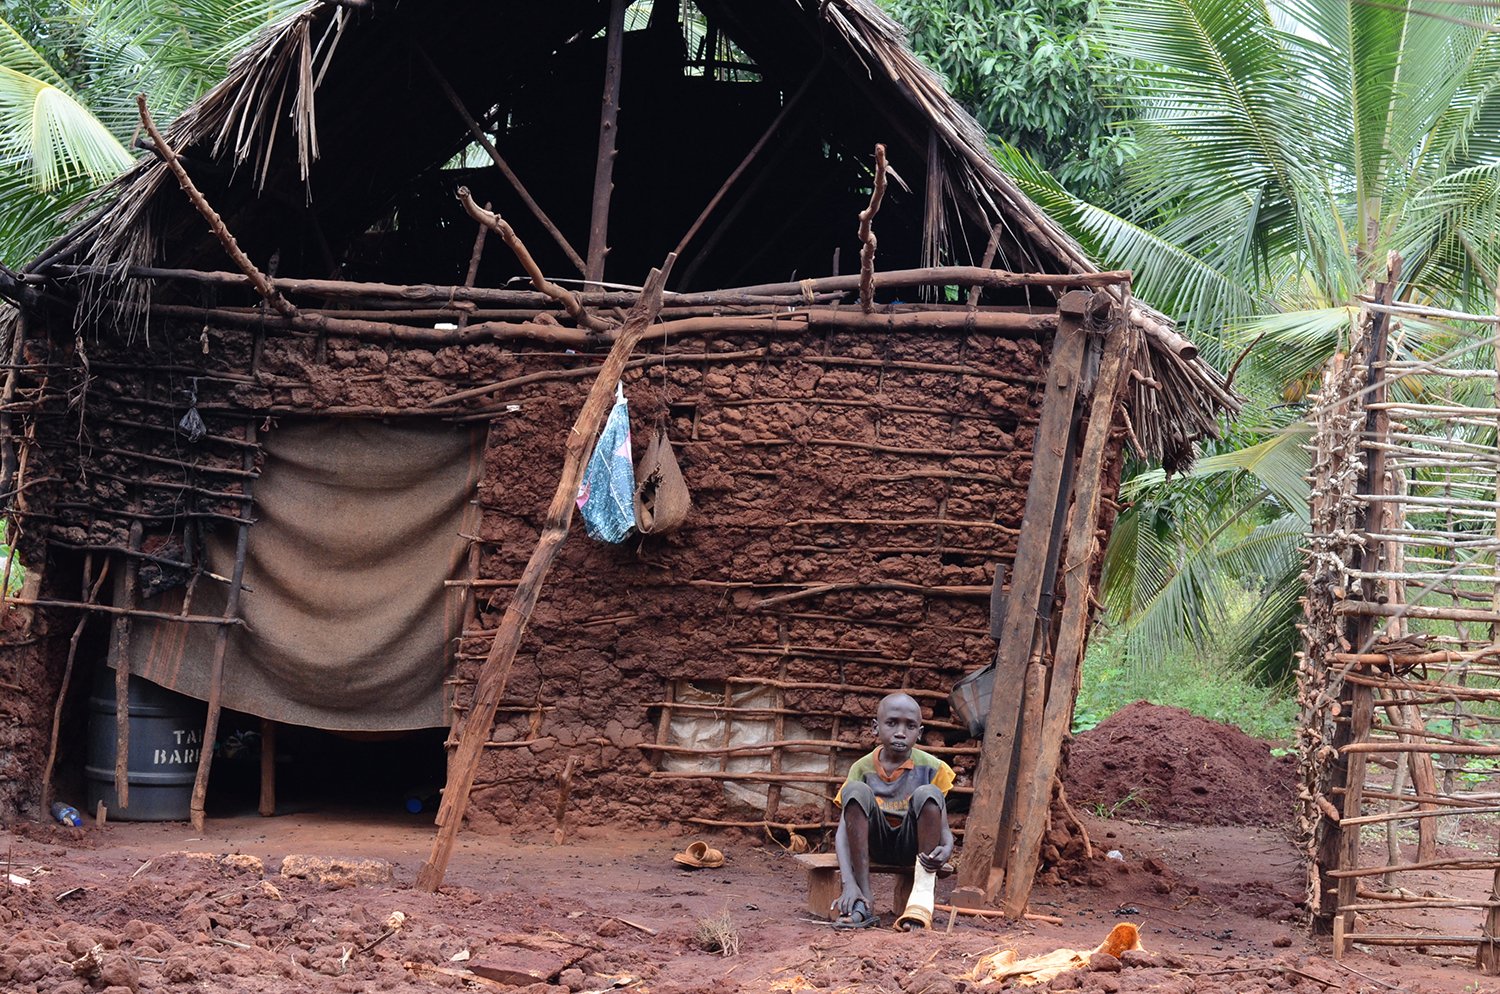 A boy sits outside a damaged house surrounded by tropical vegetation.